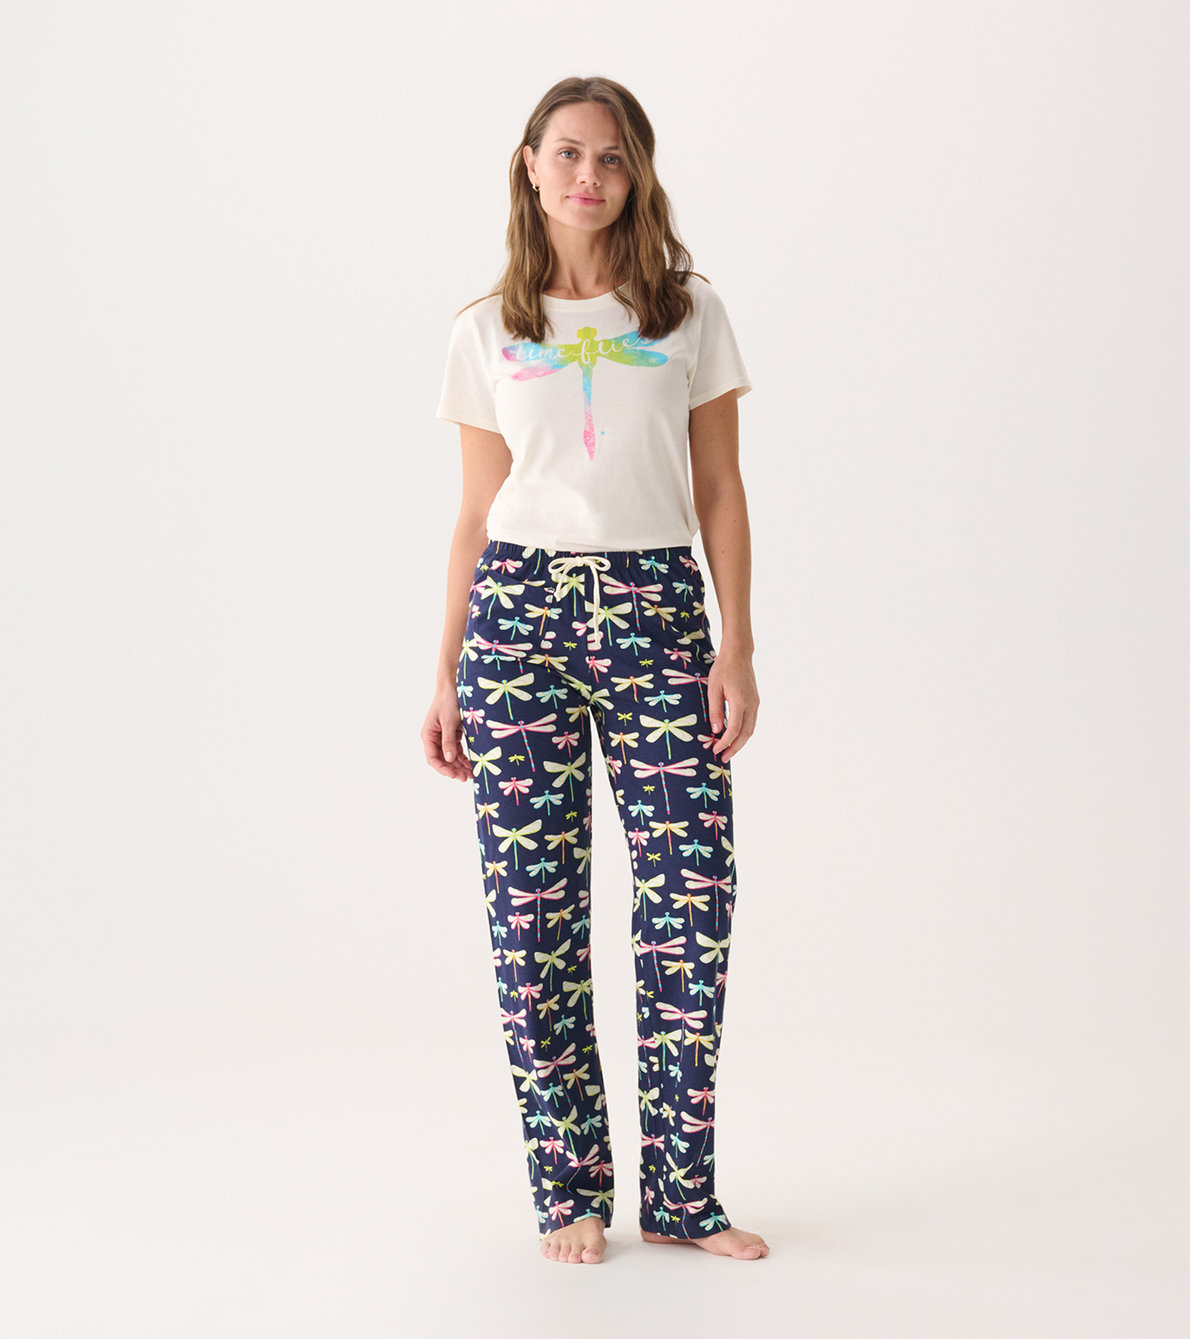 View larger image of Women's Dragon Fly T-Shirt and Pants Pajama Separates